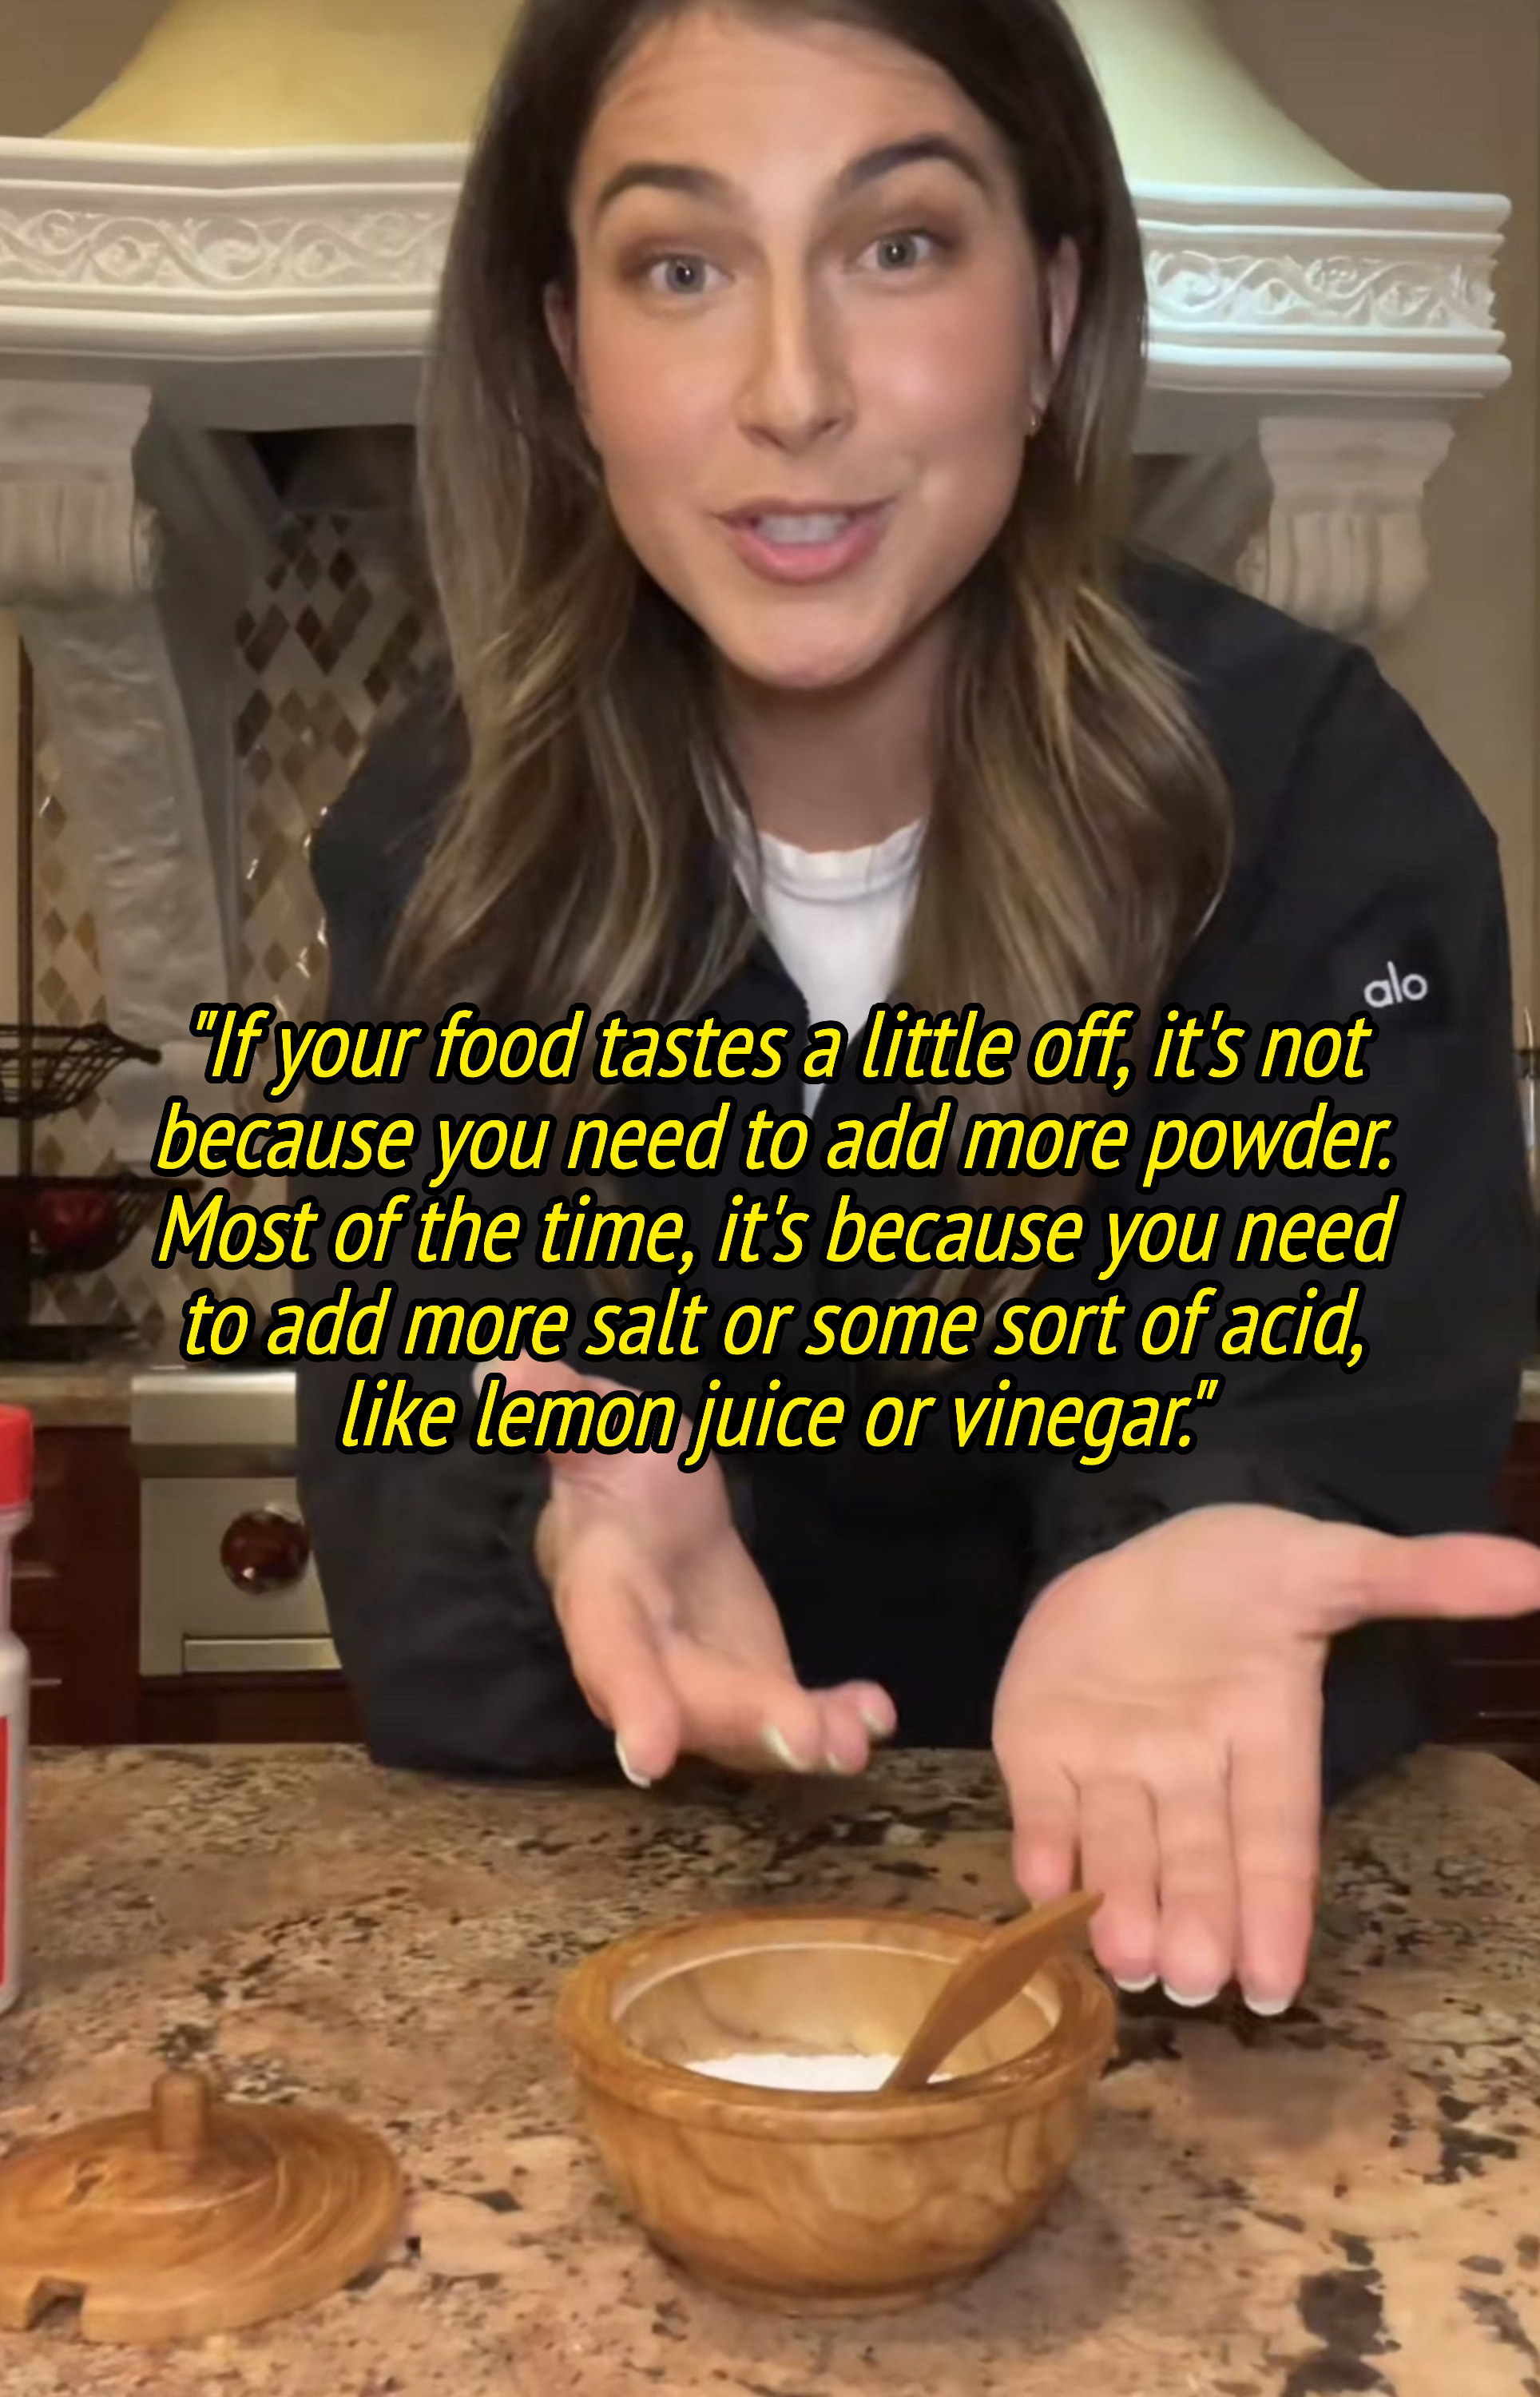 Zoe pointing to salt in video and saying &quot;if your food tastes a little off, it&#x27;s not because you need to add more powder; most of the time you need more salt or some sort of acid, like lemon juice or vinegar&quot;